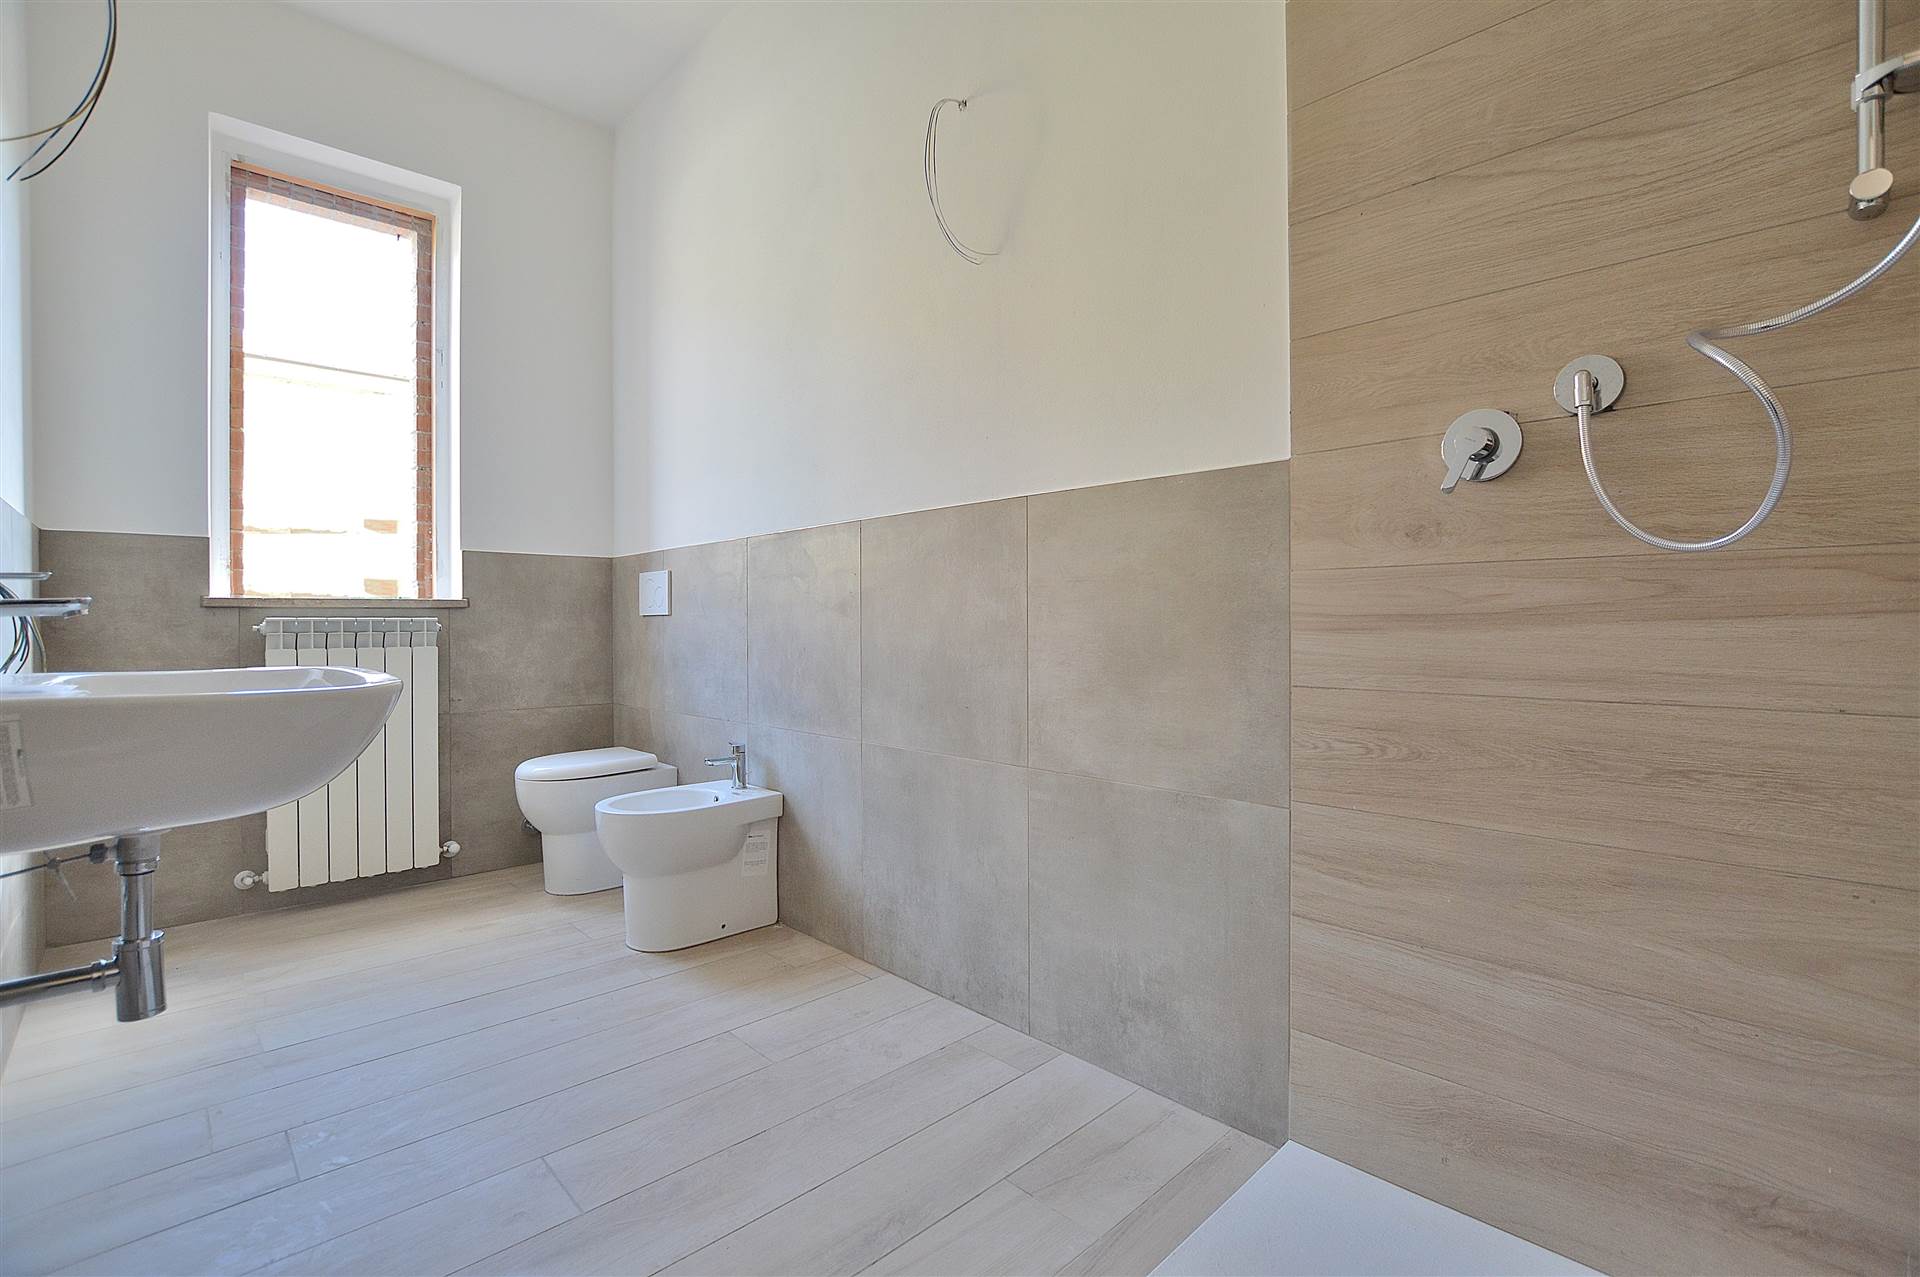 DUE PONTI, SIENA, Apartment for sale of 120 Sq. mt., New construction, Heating Individual heating system, Energetic class: C, Epi: 50 kwh/m2 year, placed at 1° on 2, composed by: 4 Rooms, Kitchenette,